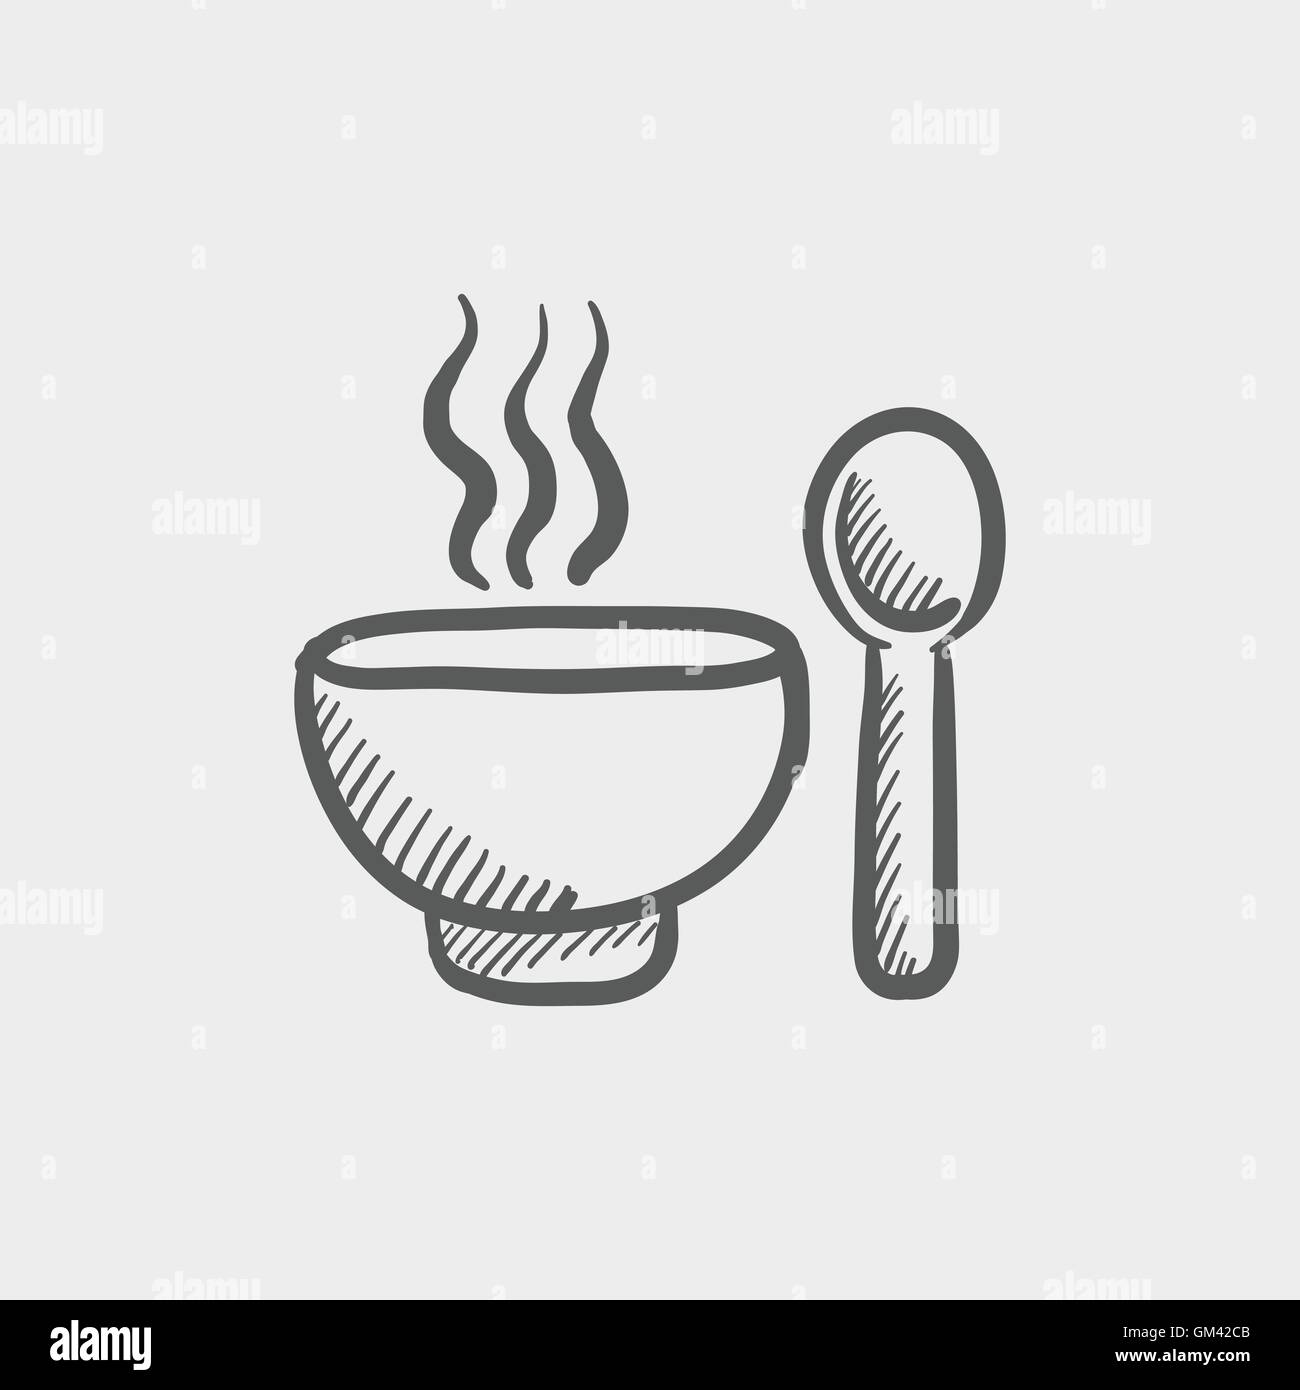 Bowl of hot soup with spoon sketch icon Stock Vector